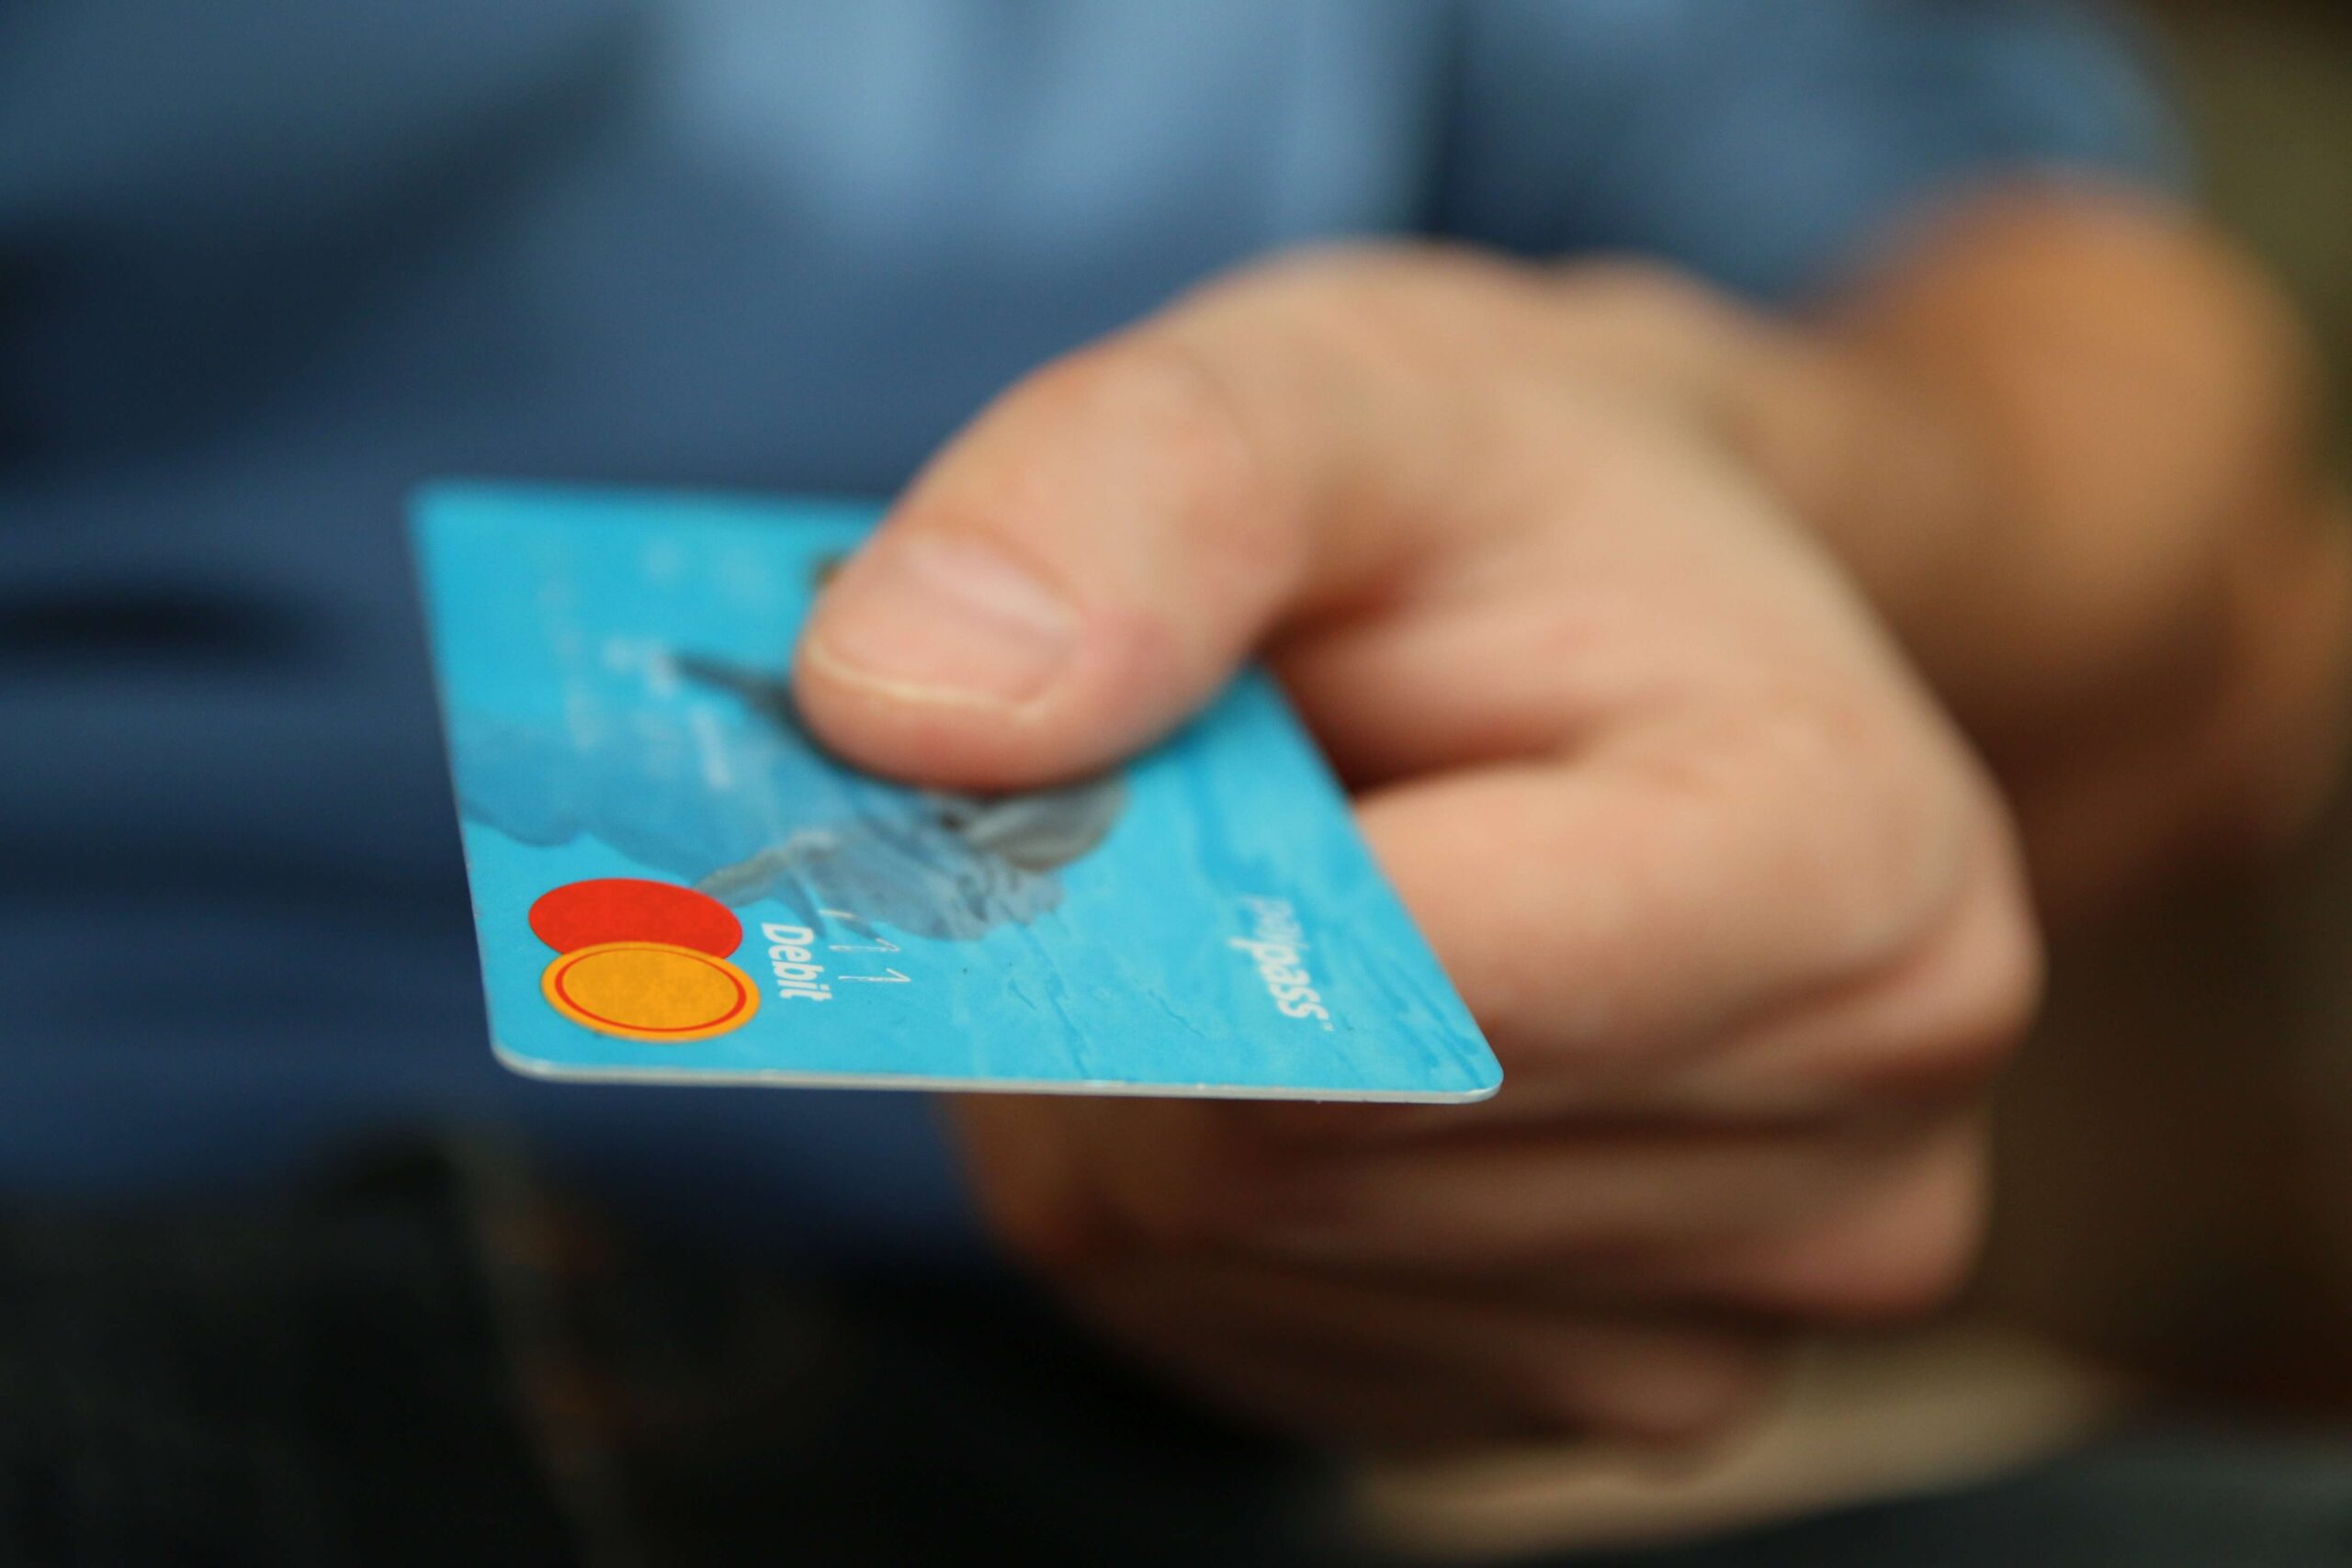 Image of hand holding a debit card